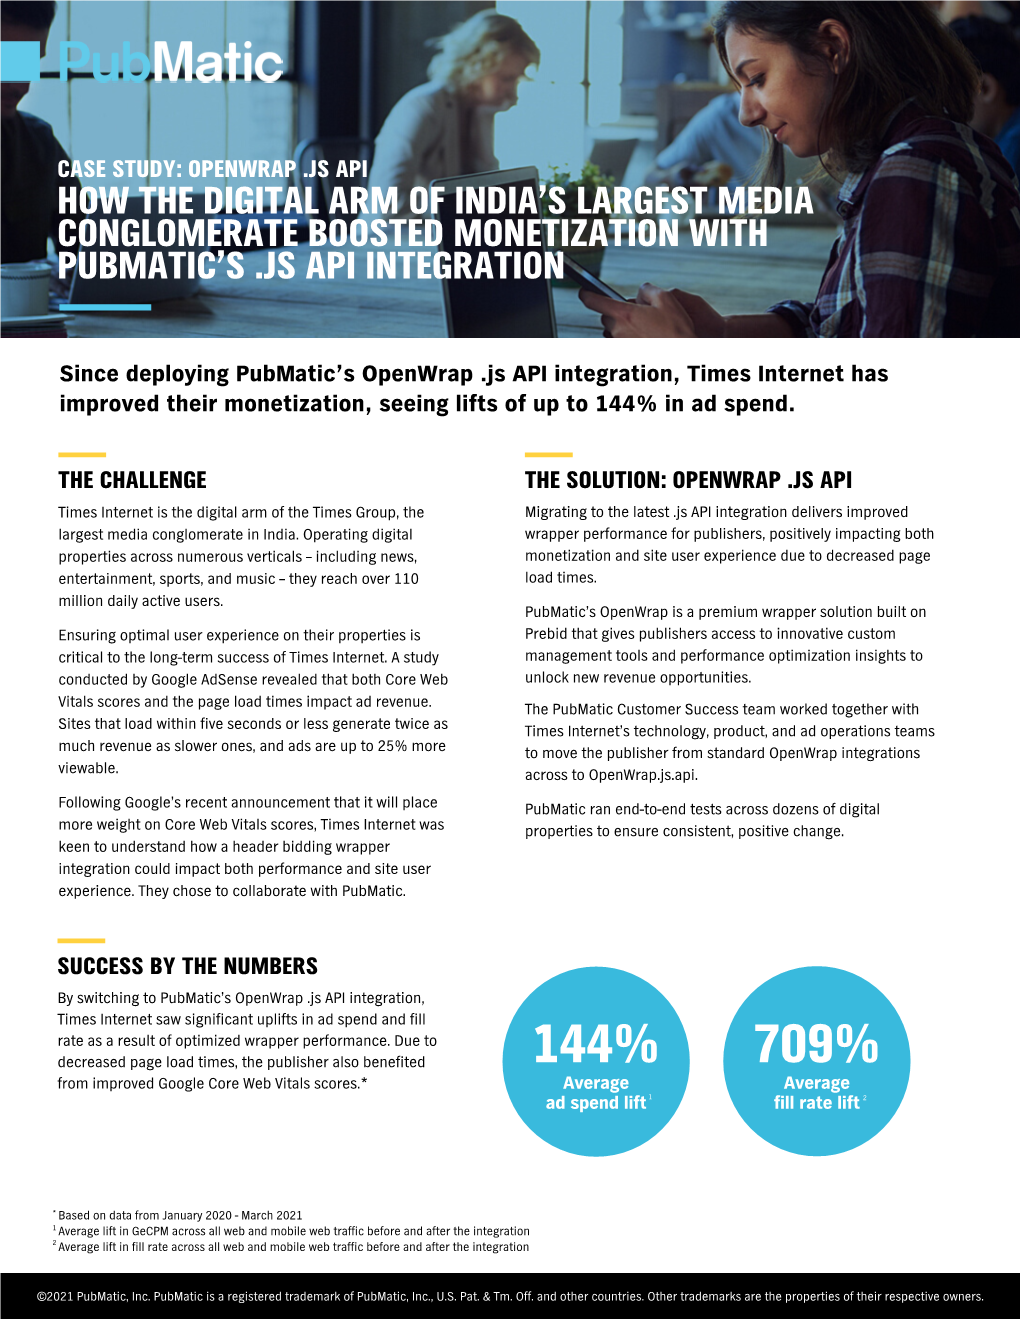 Case Study: Openwrap .Js Api How the Digital Arm of India’S Largest Media Conglomerate Boosted Monetization with Pubmatic’S .Js Api Integration